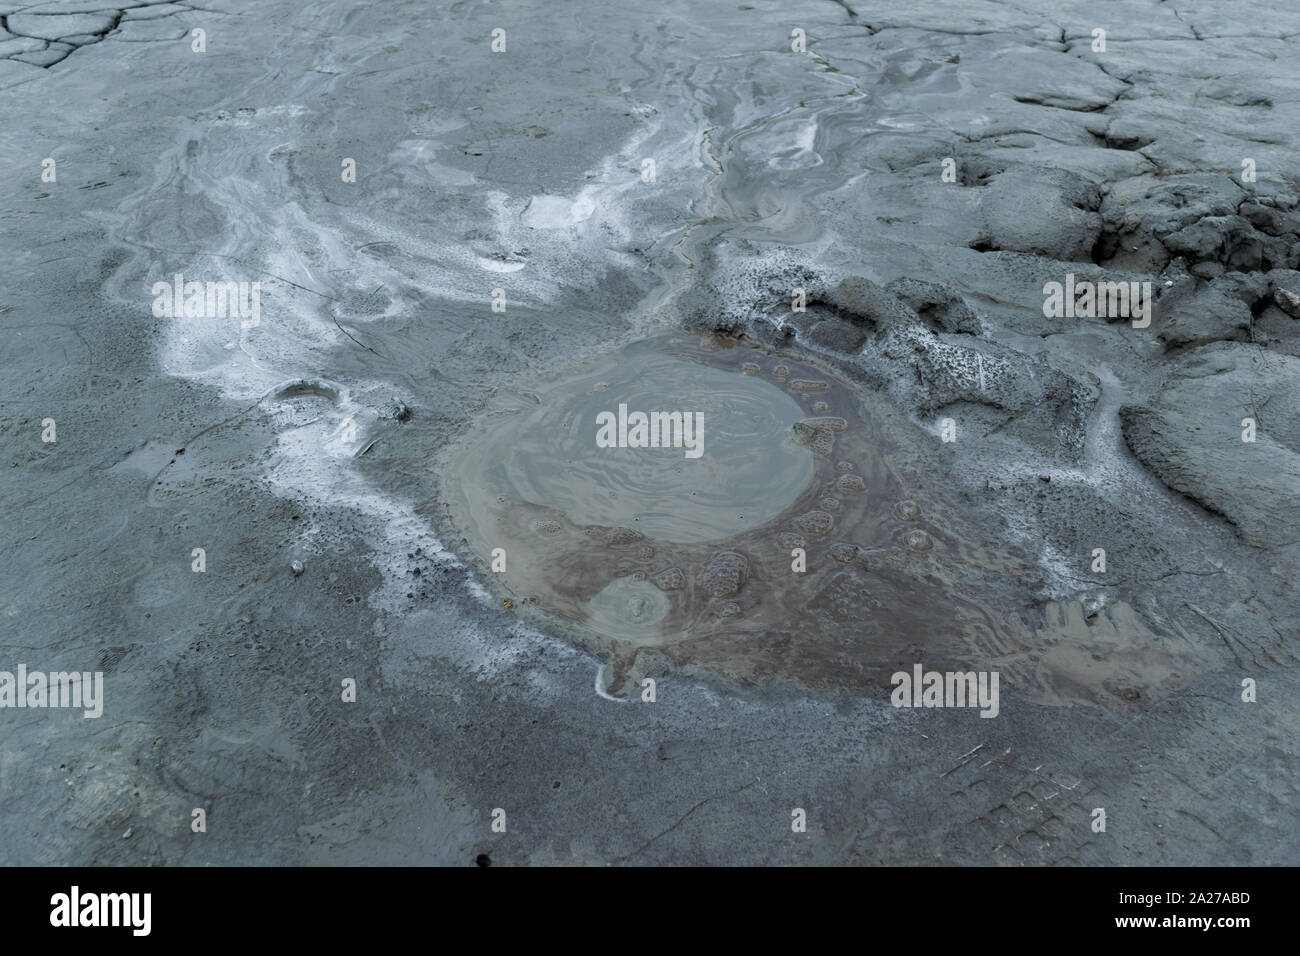 close-up of a bubbling live mud volcano Stock Photo